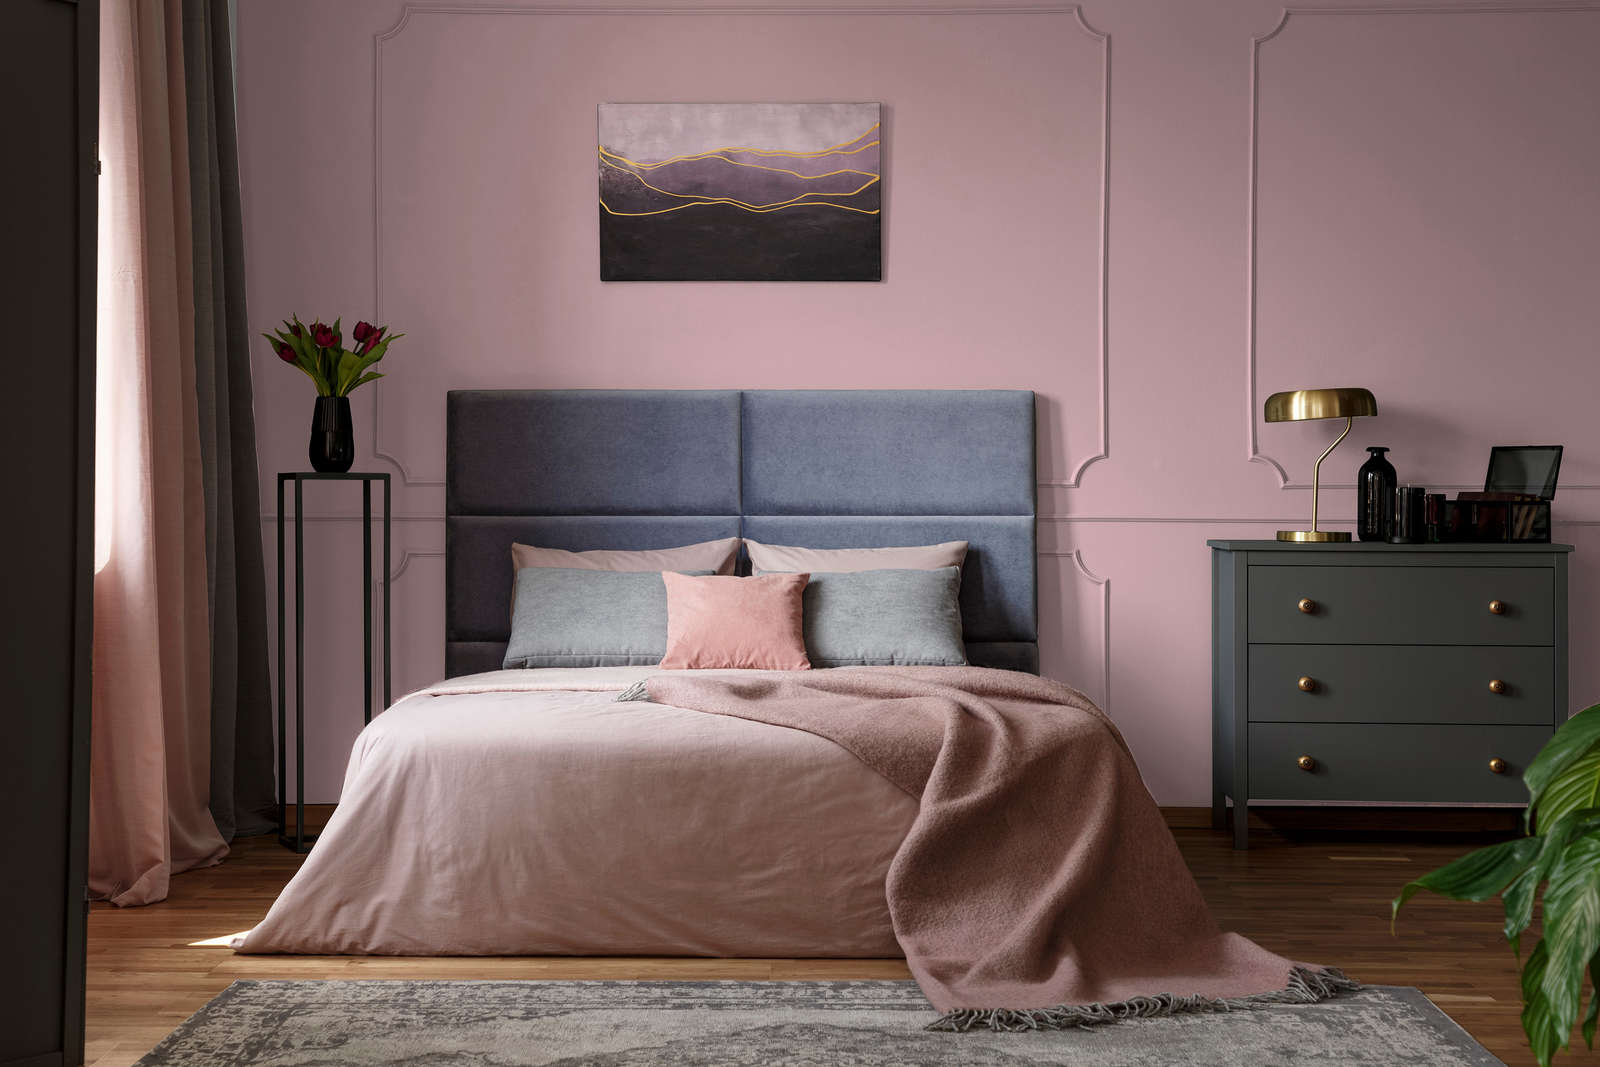             Premium Wall Paint lovely pink »Blooming Blossom« NW1016 – 2,5 litre
        